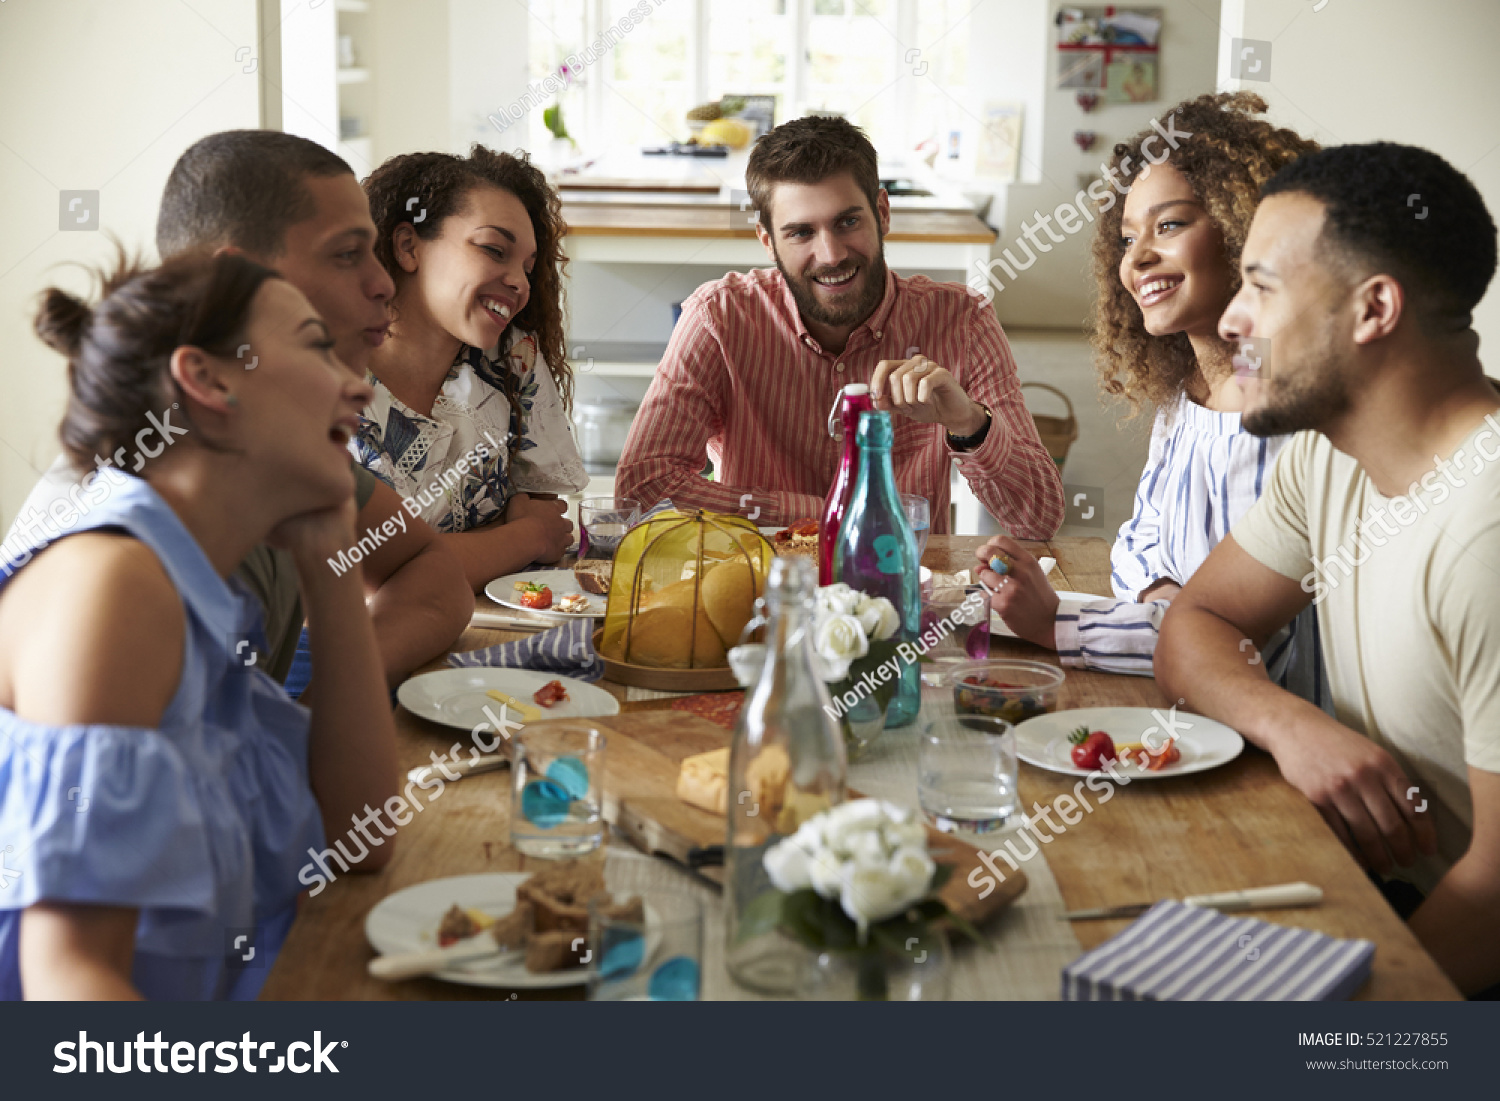 Young adults laughing as they talk at a table over lunch #521227855